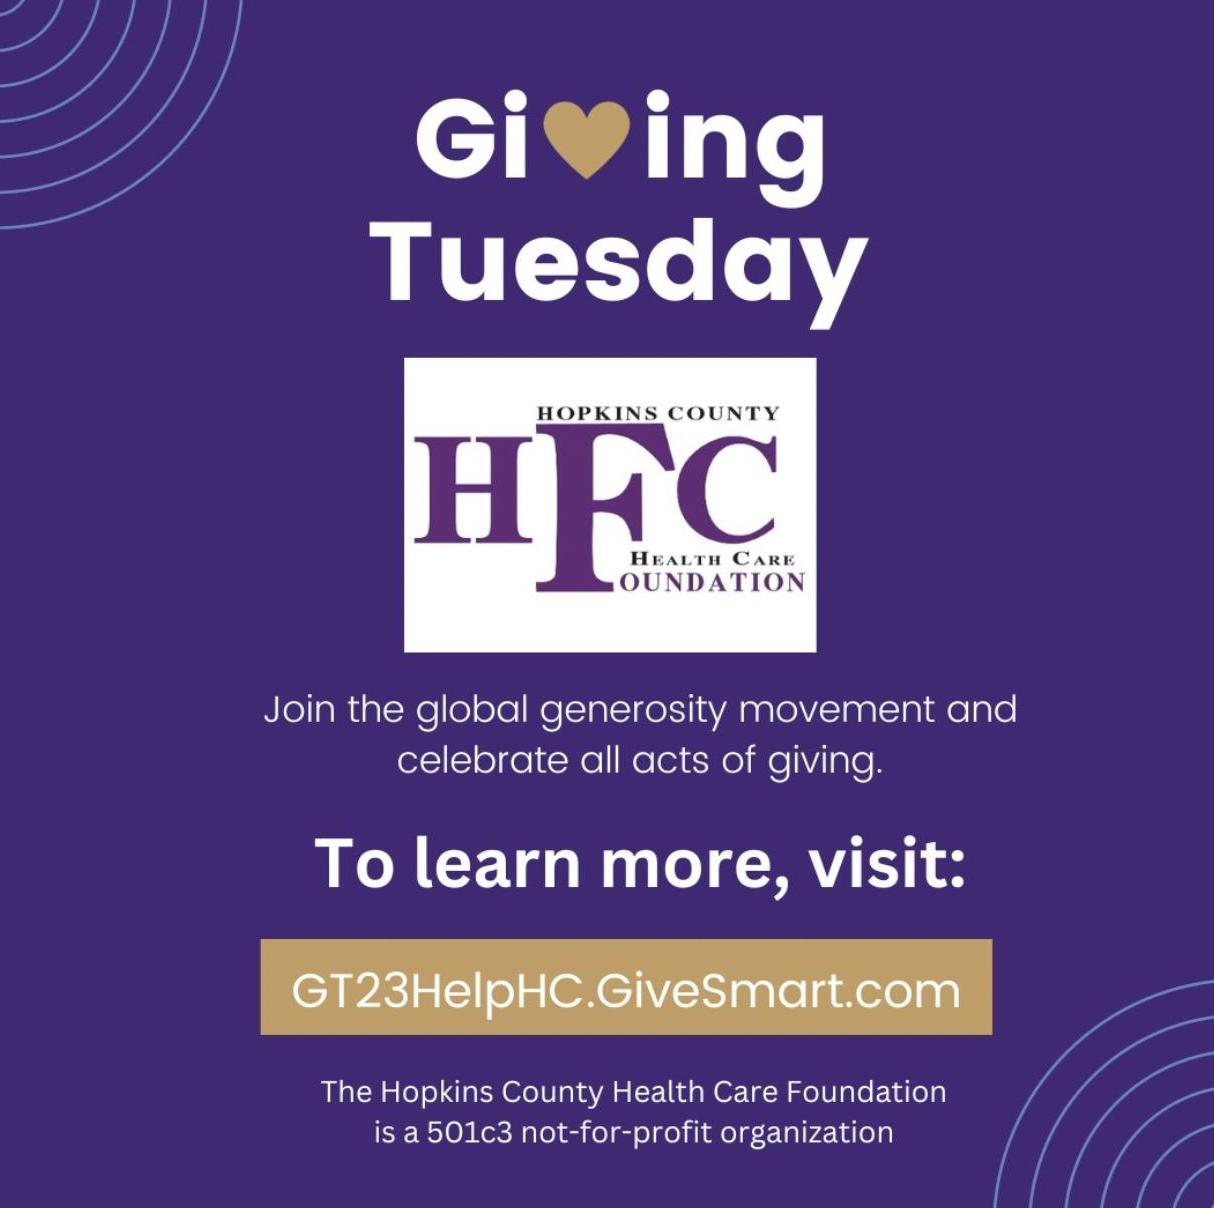 Health Care Foundation Participates in Giving Tuesday